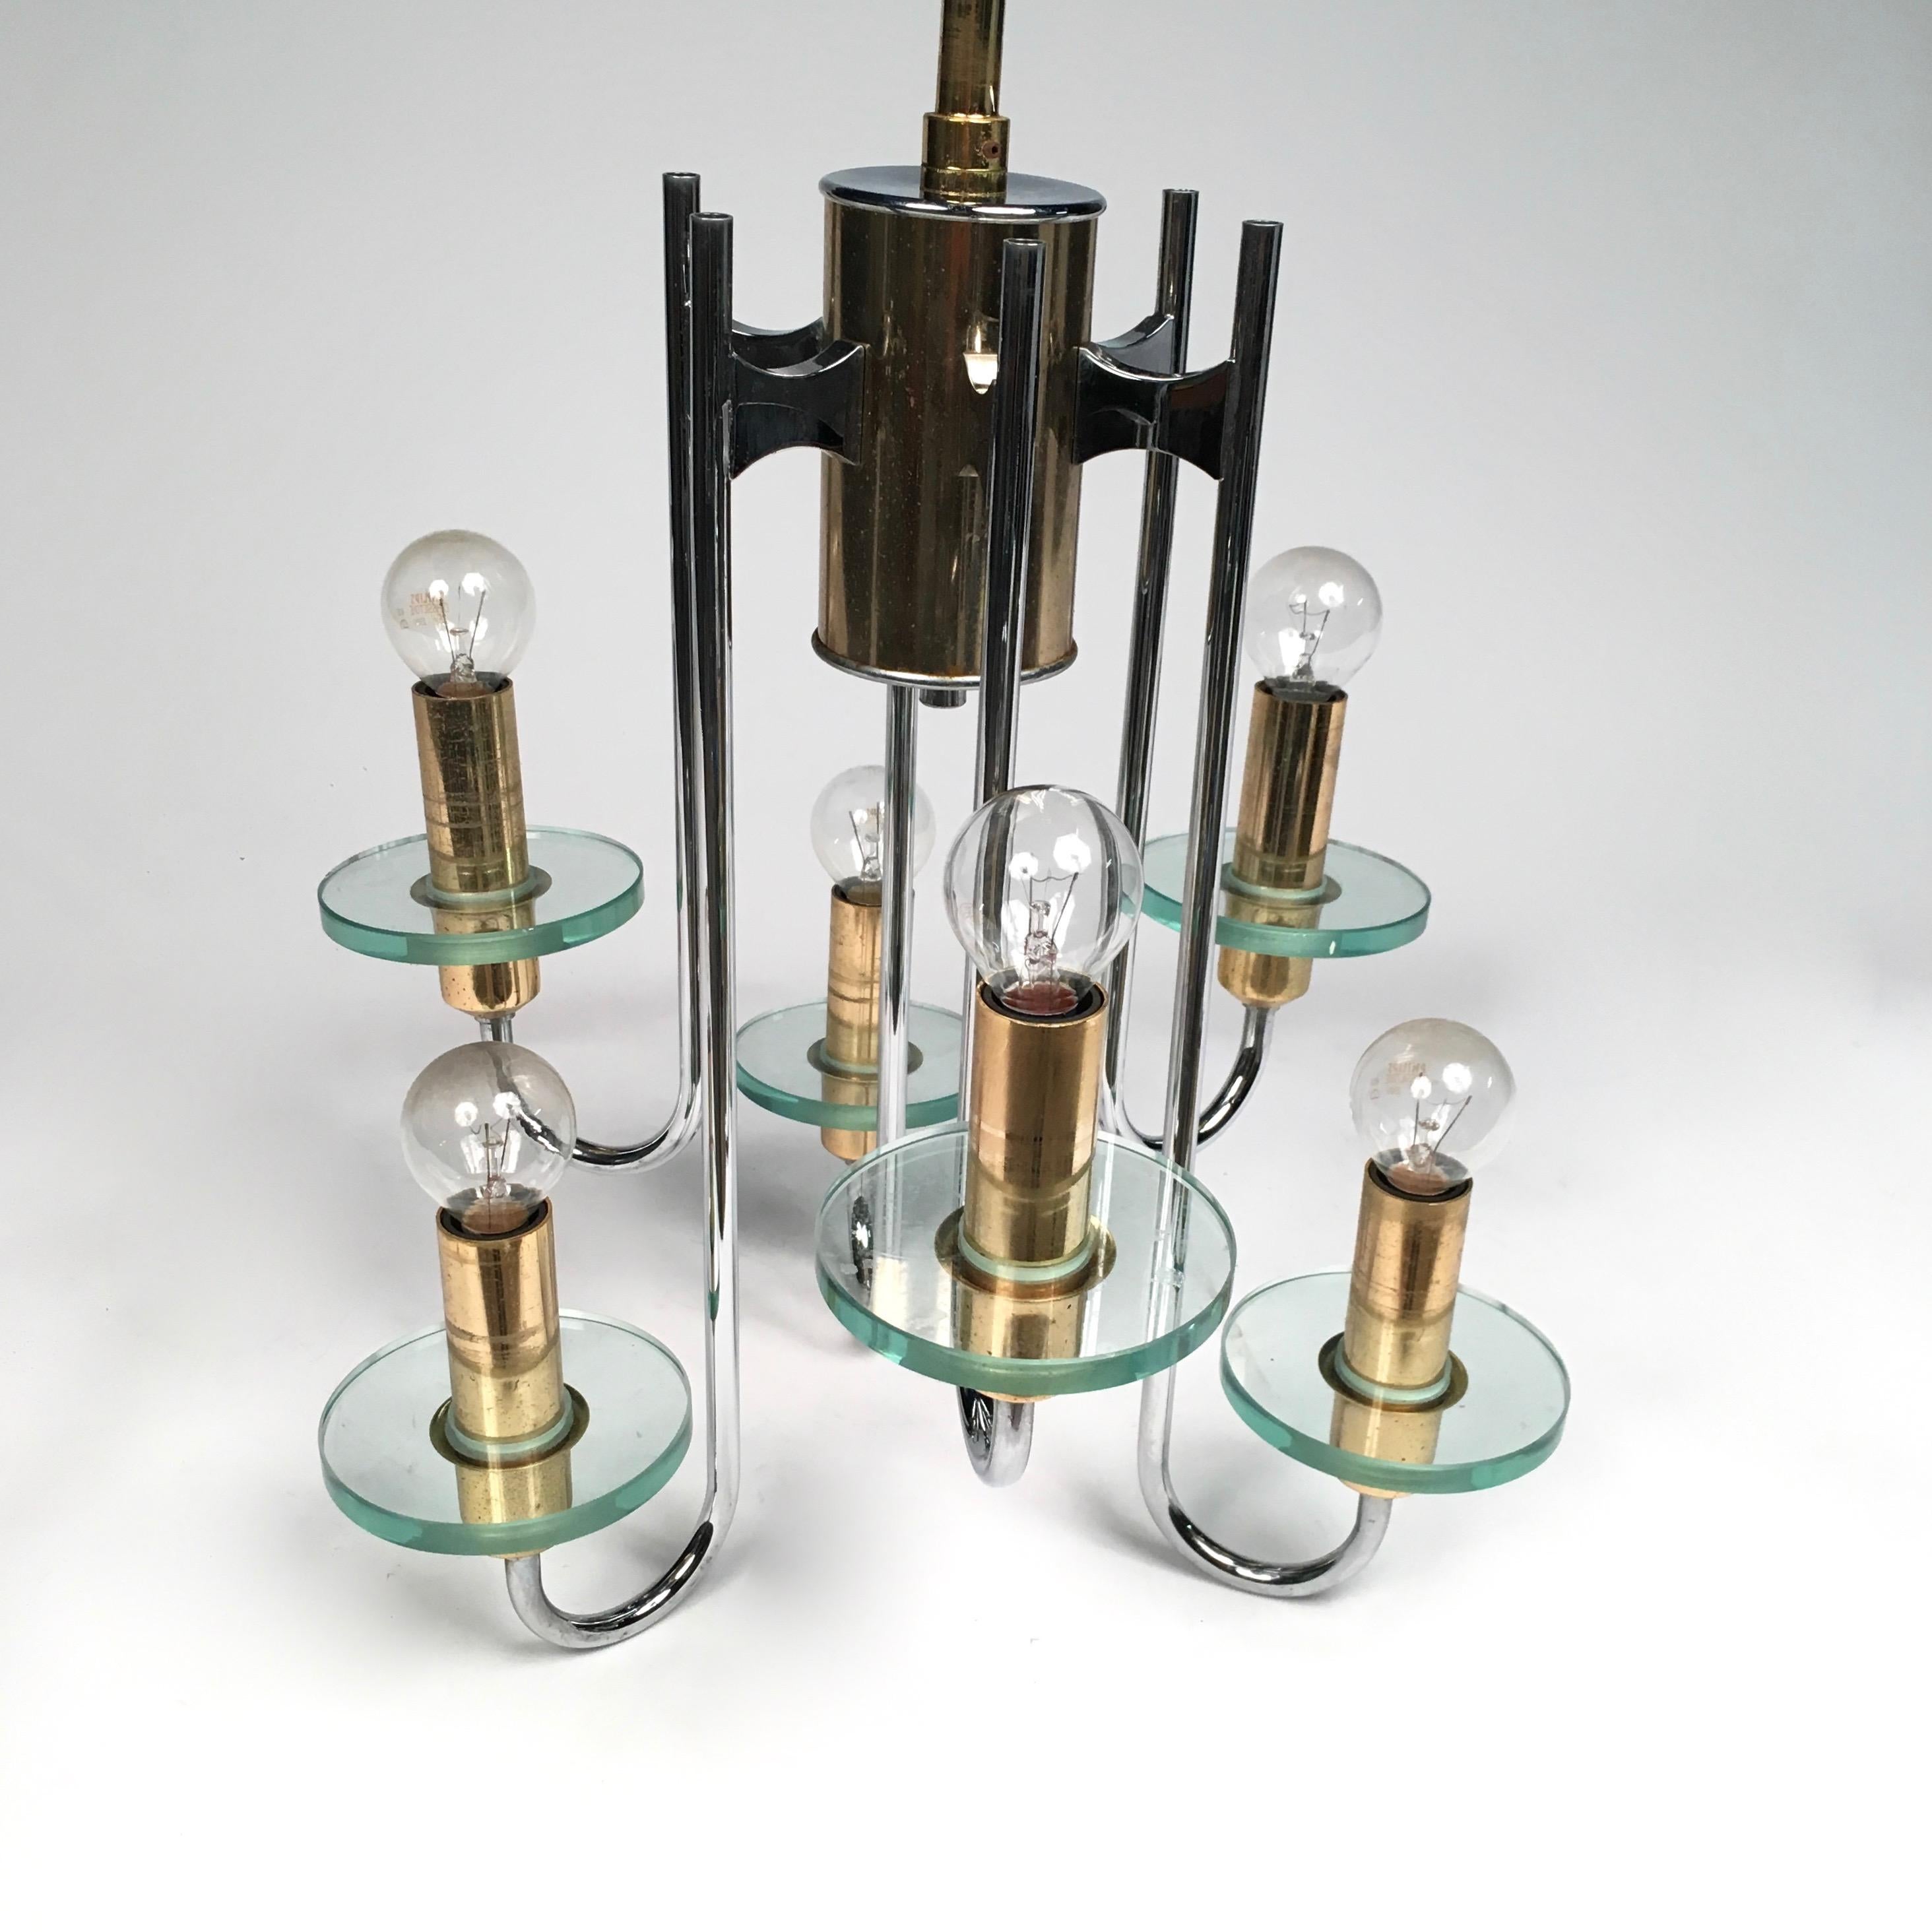 A six-arm chandelier with enameled candlesticks, made of glass, brass and chrome, by Sciolari.
 